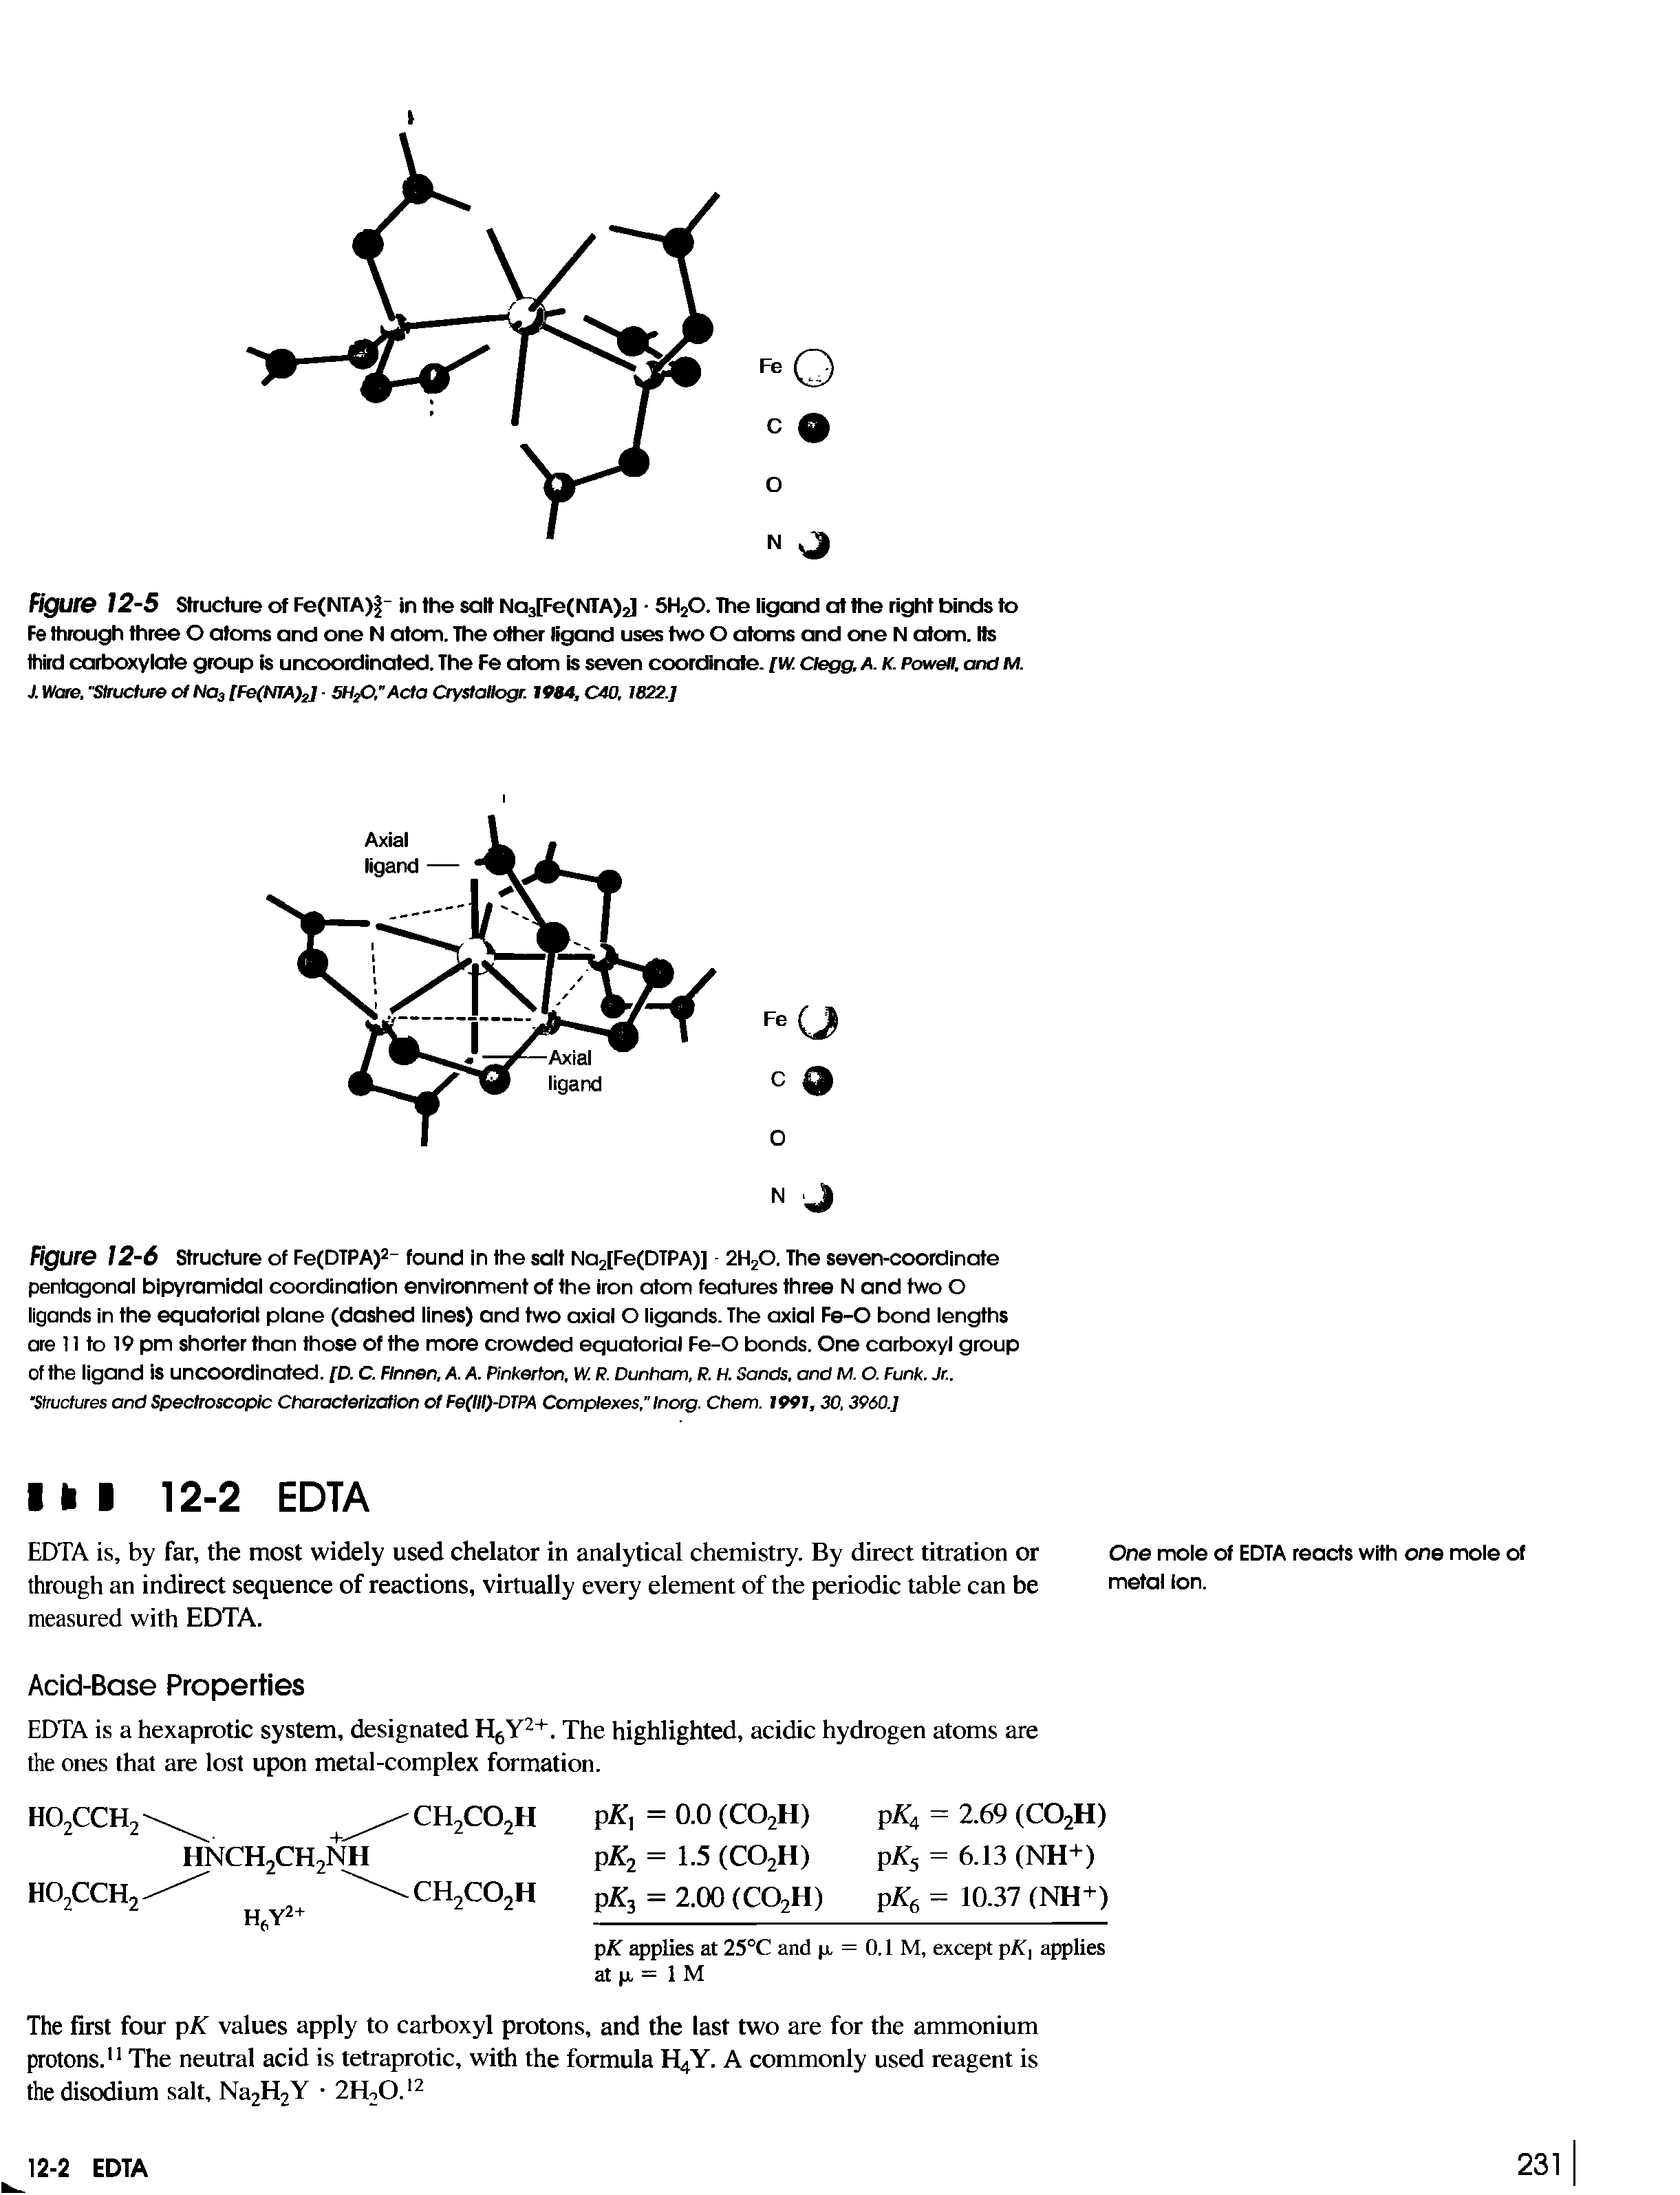 Figure 12-6 Structure of Fe(DTPA)2- found in the salt Na2[Fe(DTPA)] - 2H20. The seven-coordinate pentagonal bipyramidal coordination environment of the iron atom features three N and two O ligands in the equatorial plane (dashed lines) and two axial O ligands. The axial Fe-O bond lengths are 11 to 19 pm shorter than those of the more crowded equatorial Fe-O bonds. One carboxyl group of the ligand is uncoordinated. [D. C. Flnnen, A. A. Pinkerton, W. R. Dunham, R. H. Sands, and M. O. Funk. Jr..